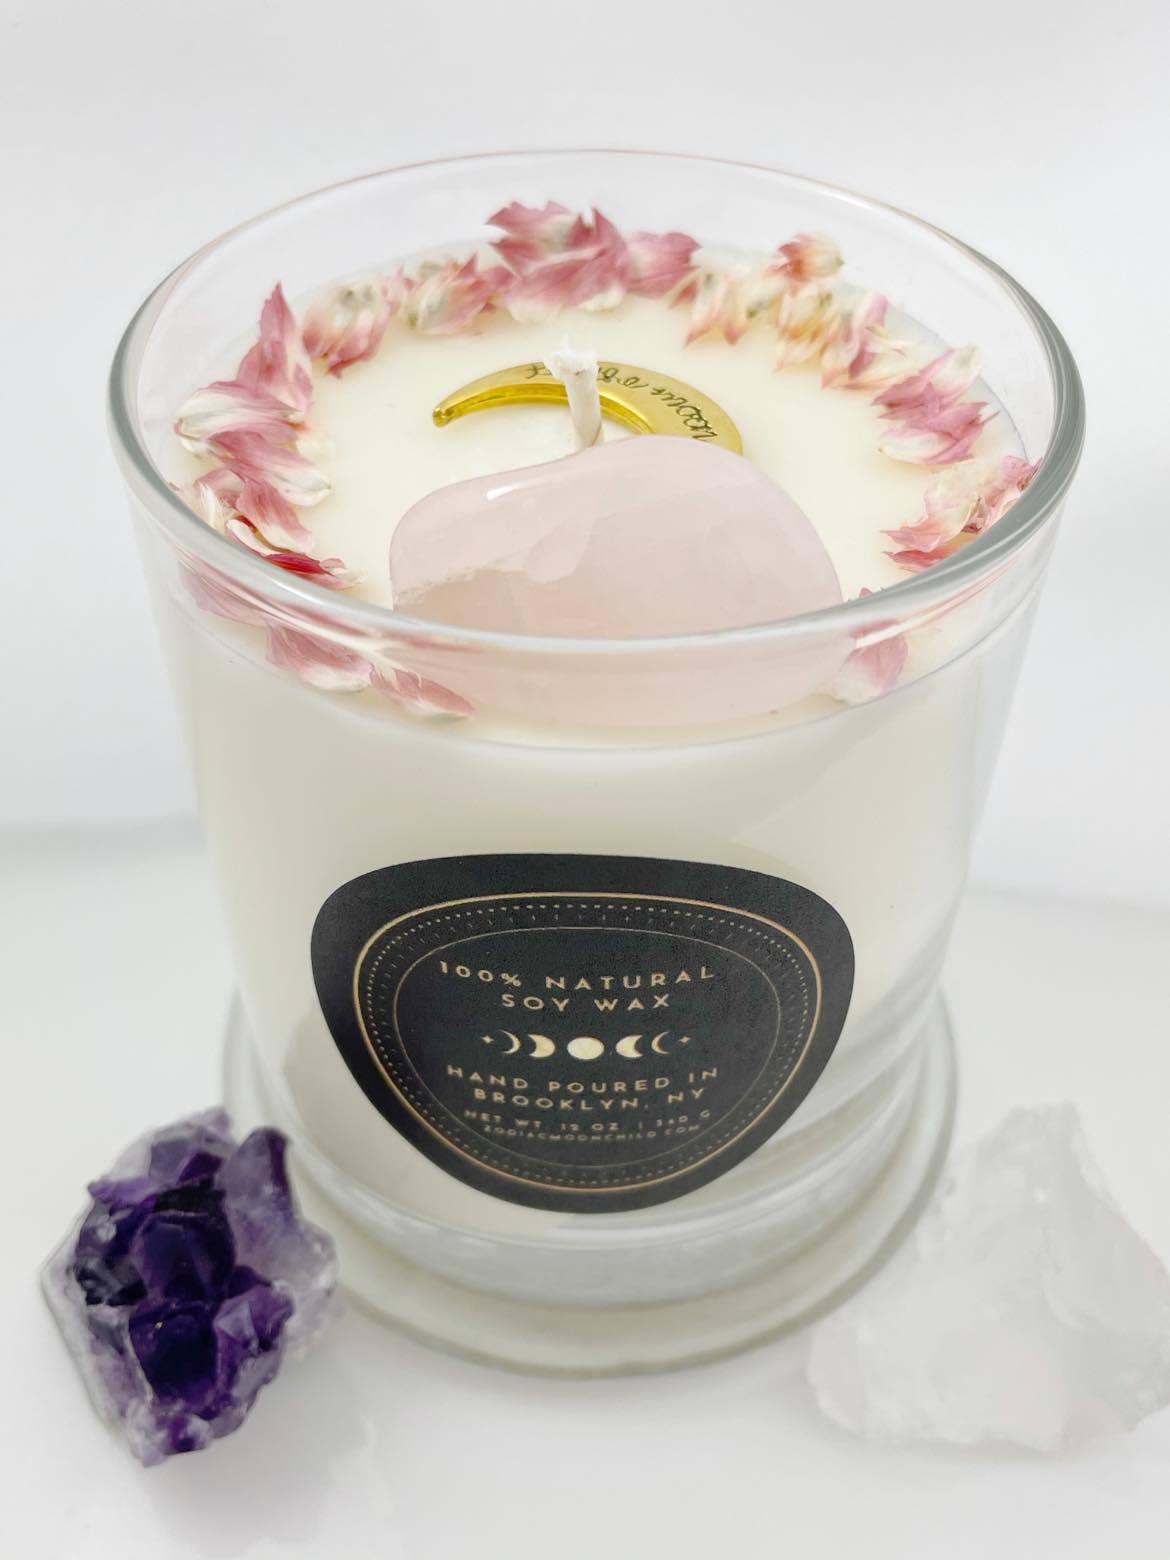 2023 New Beginnings: New Moon Crystal Candle